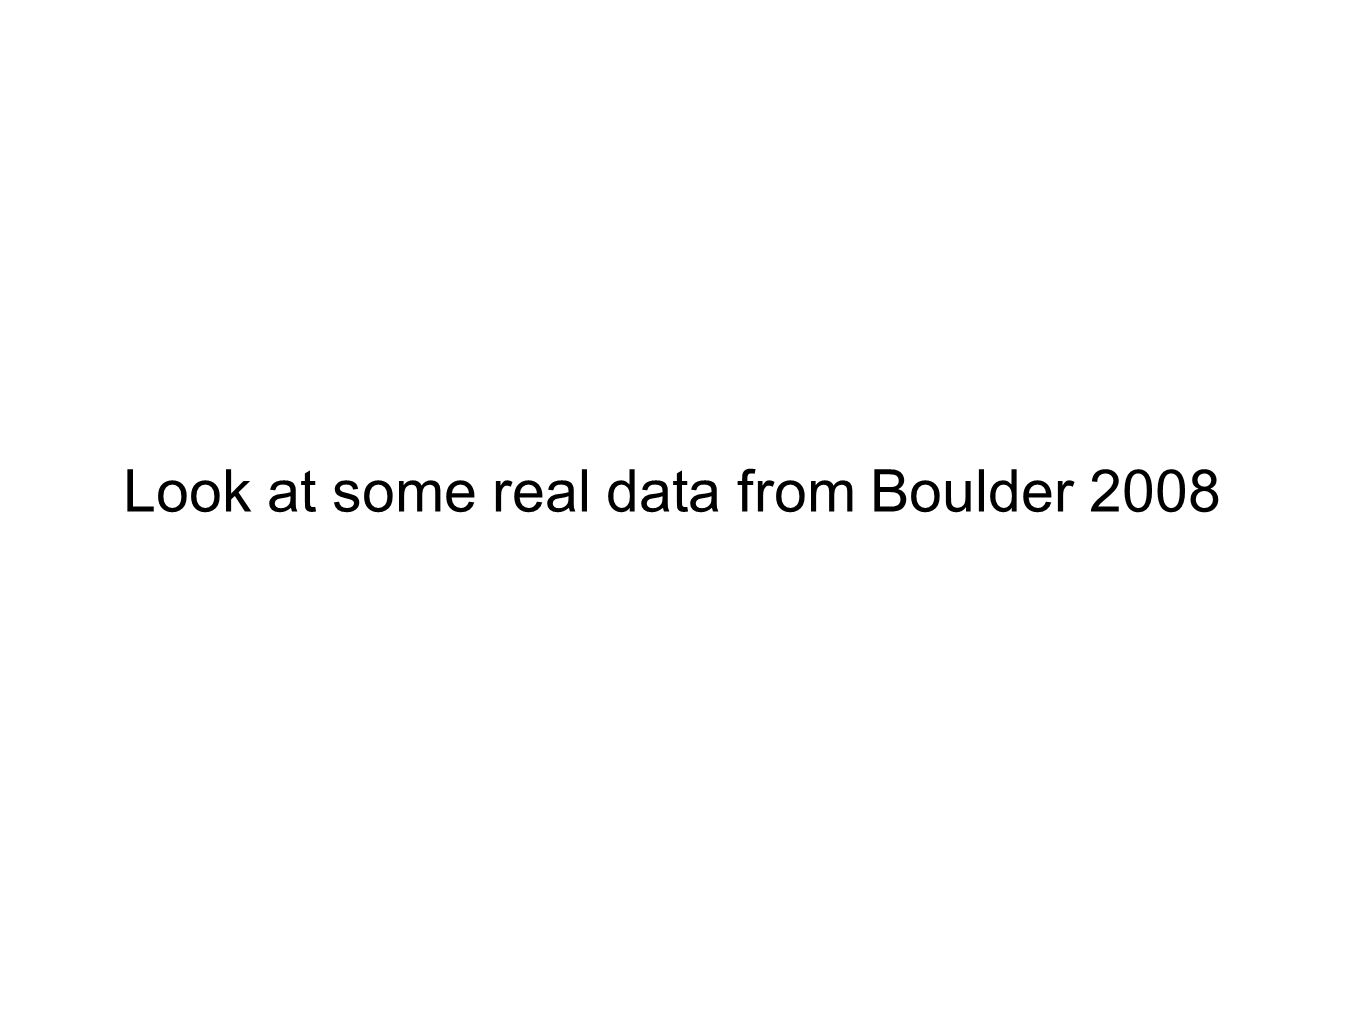 Look at some real data from Boulder 2008